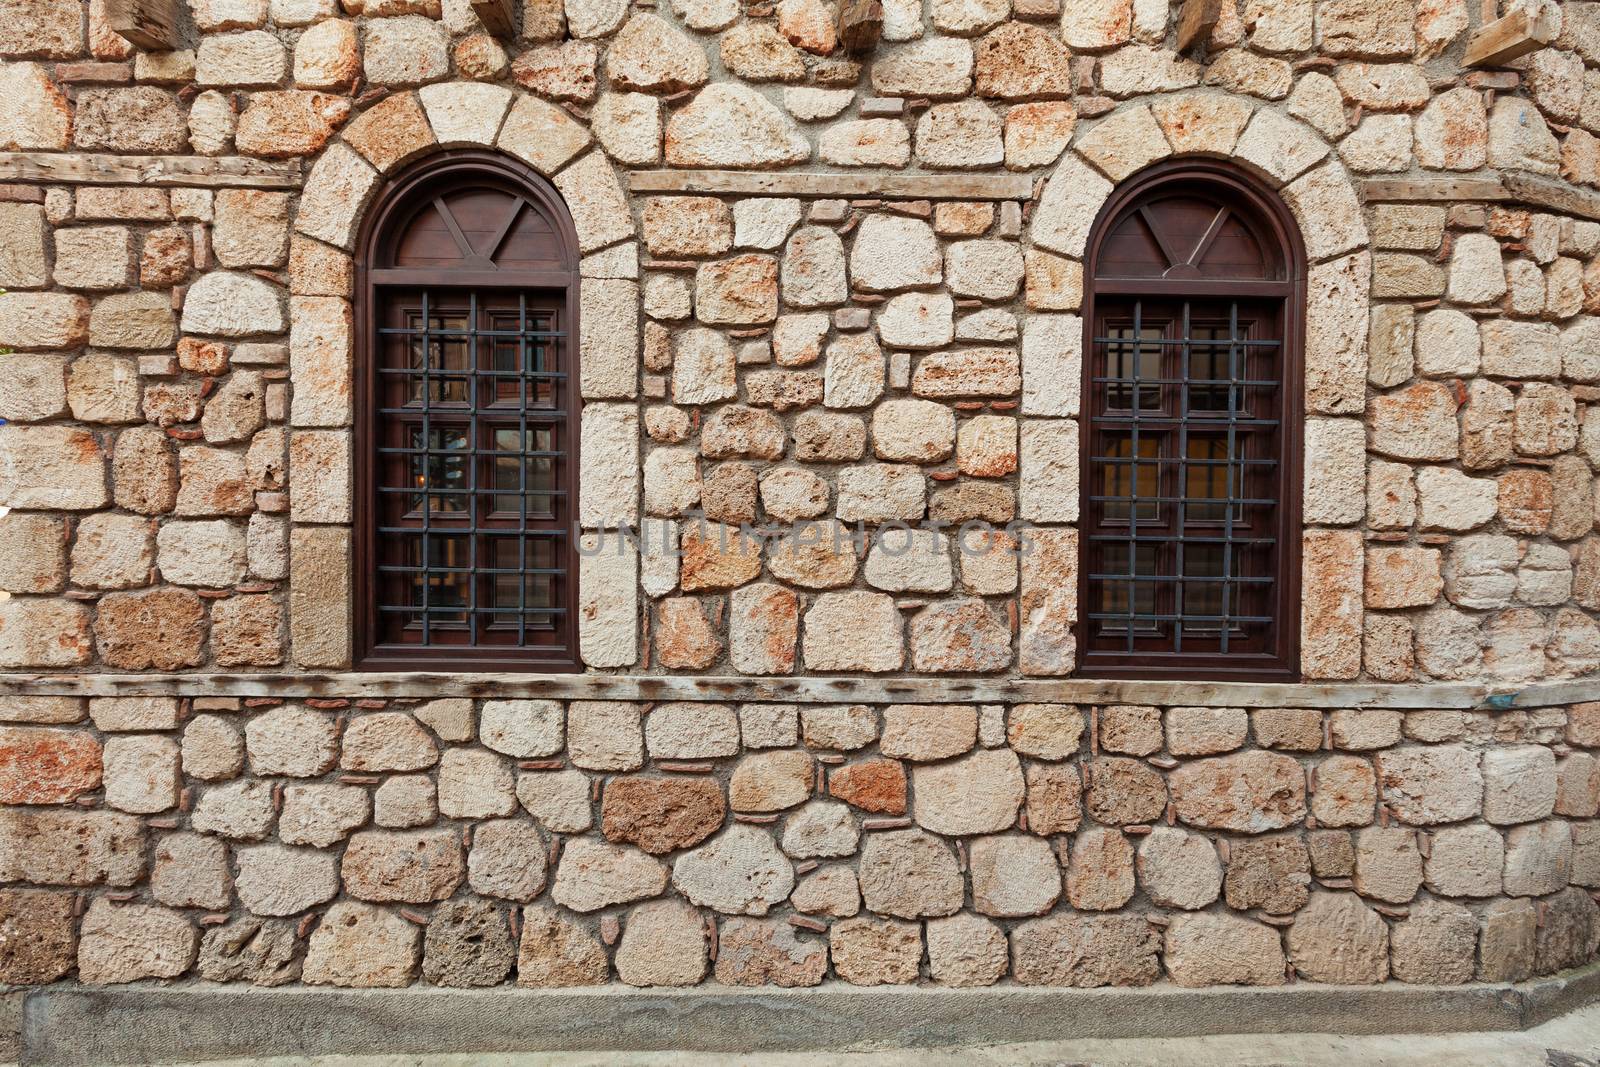 Ancient stone wall with wooden window in Turkey